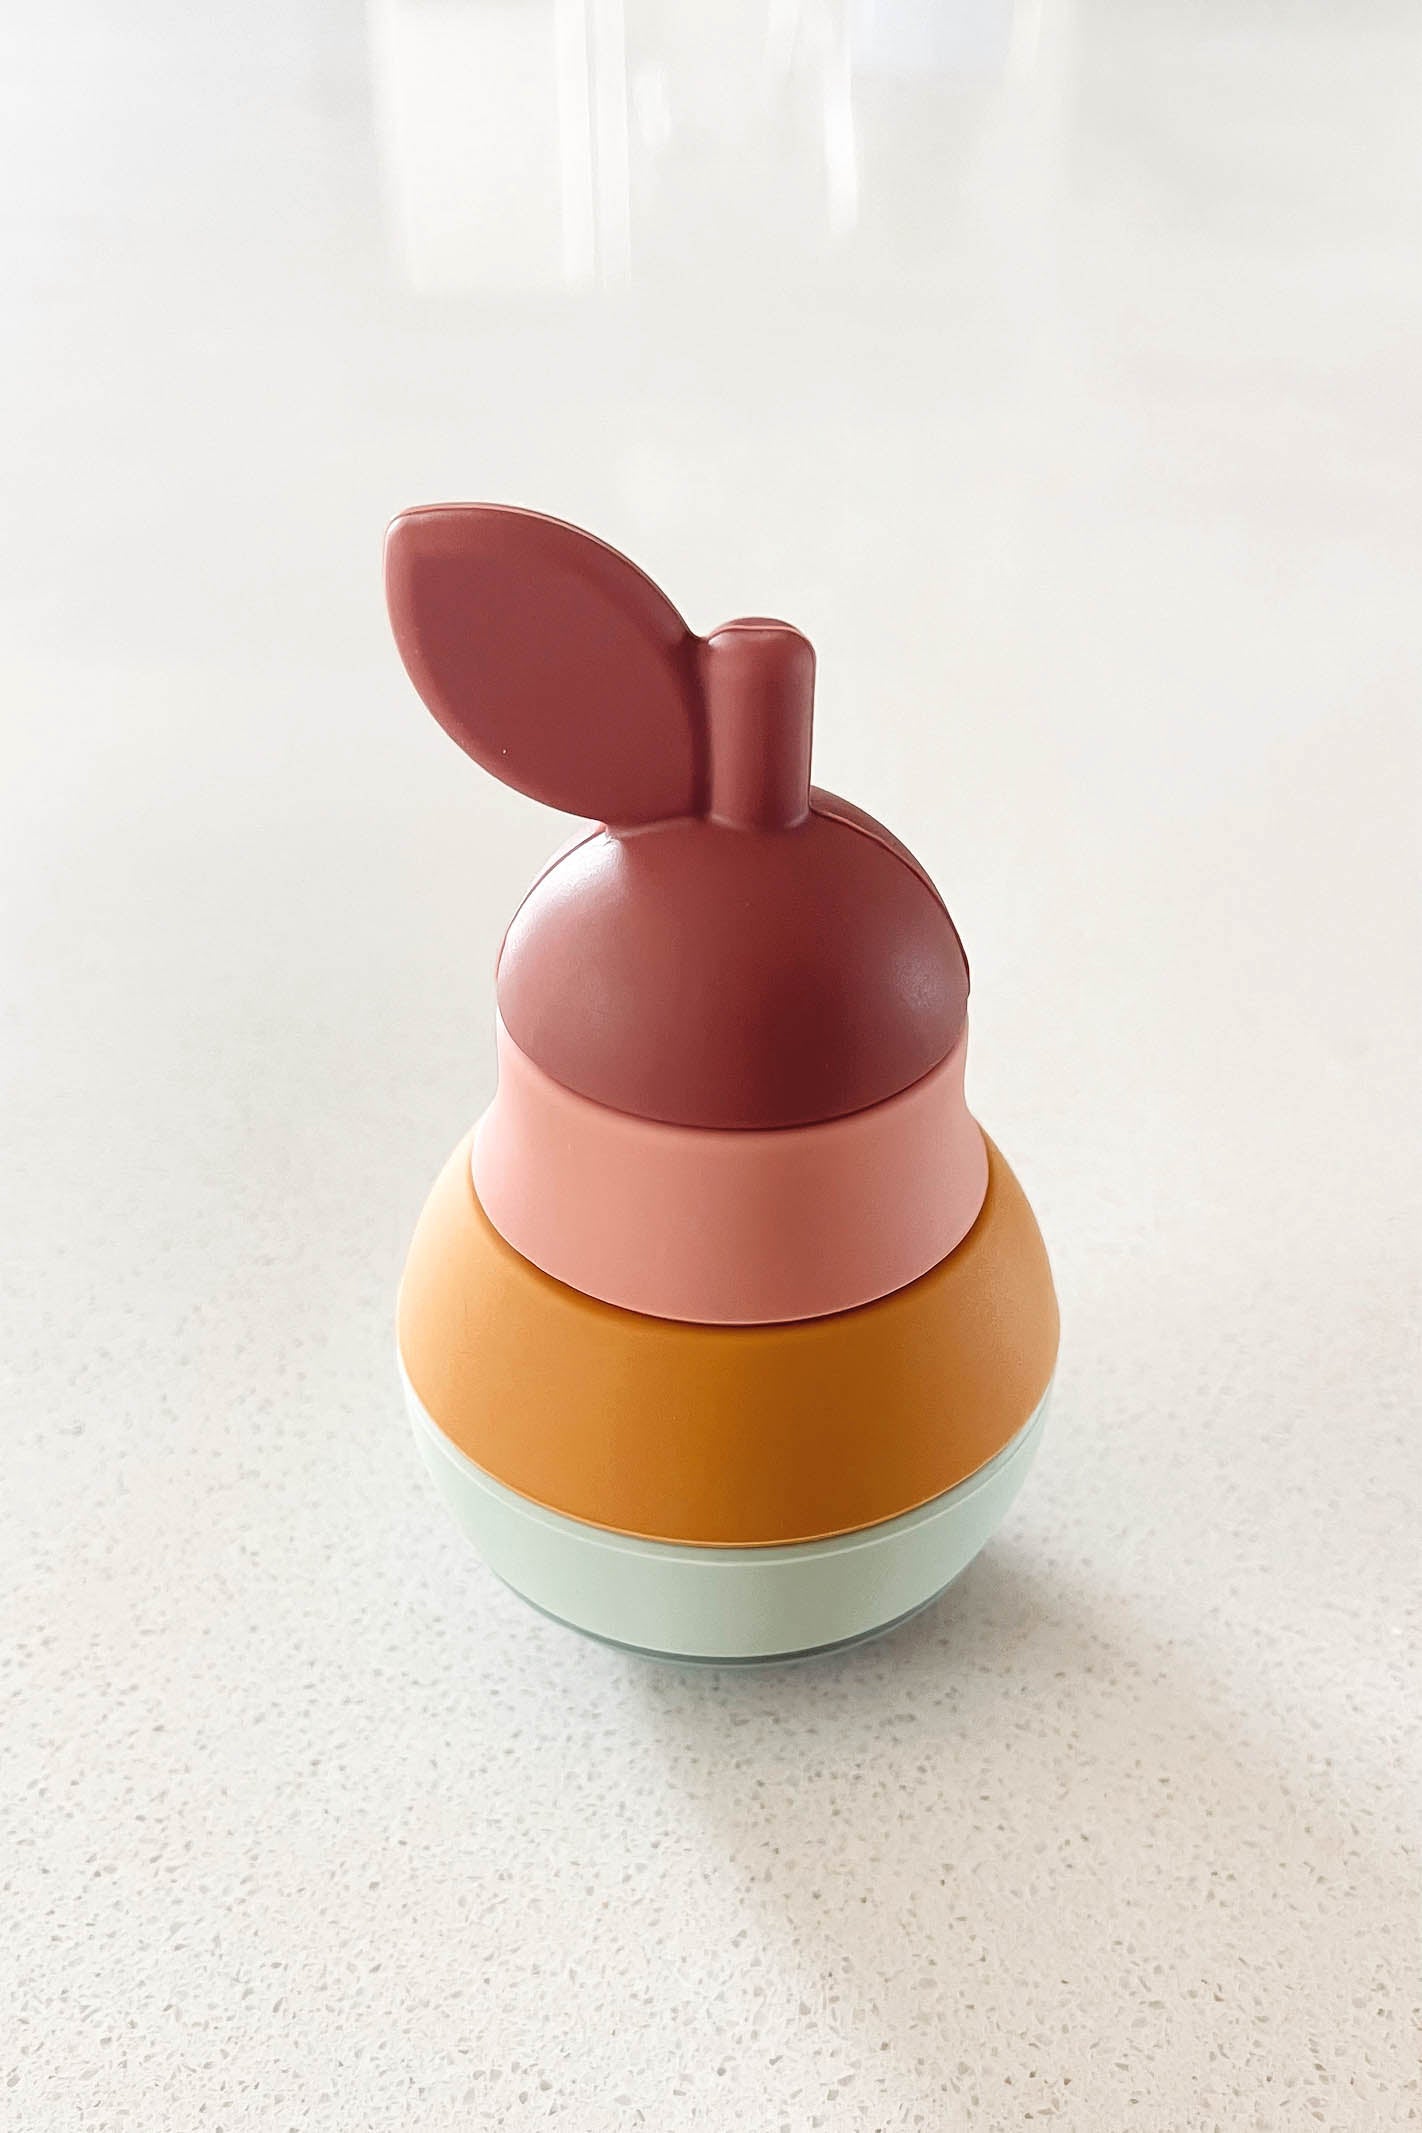 Pear Stacking Baby Silicone Toy